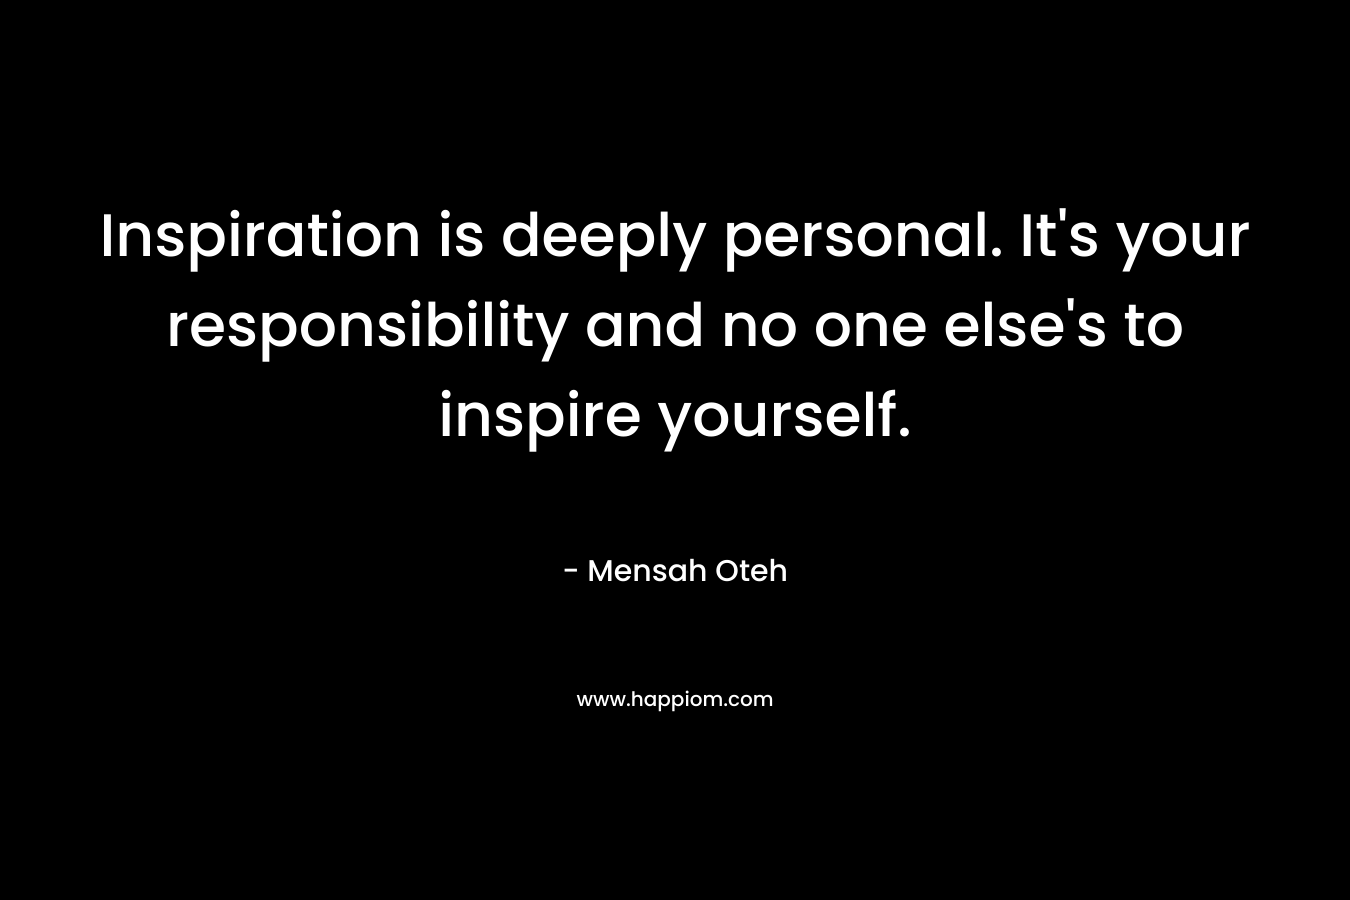 Inspiration is deeply personal. It's your responsibility and no one else's to inspire yourself.